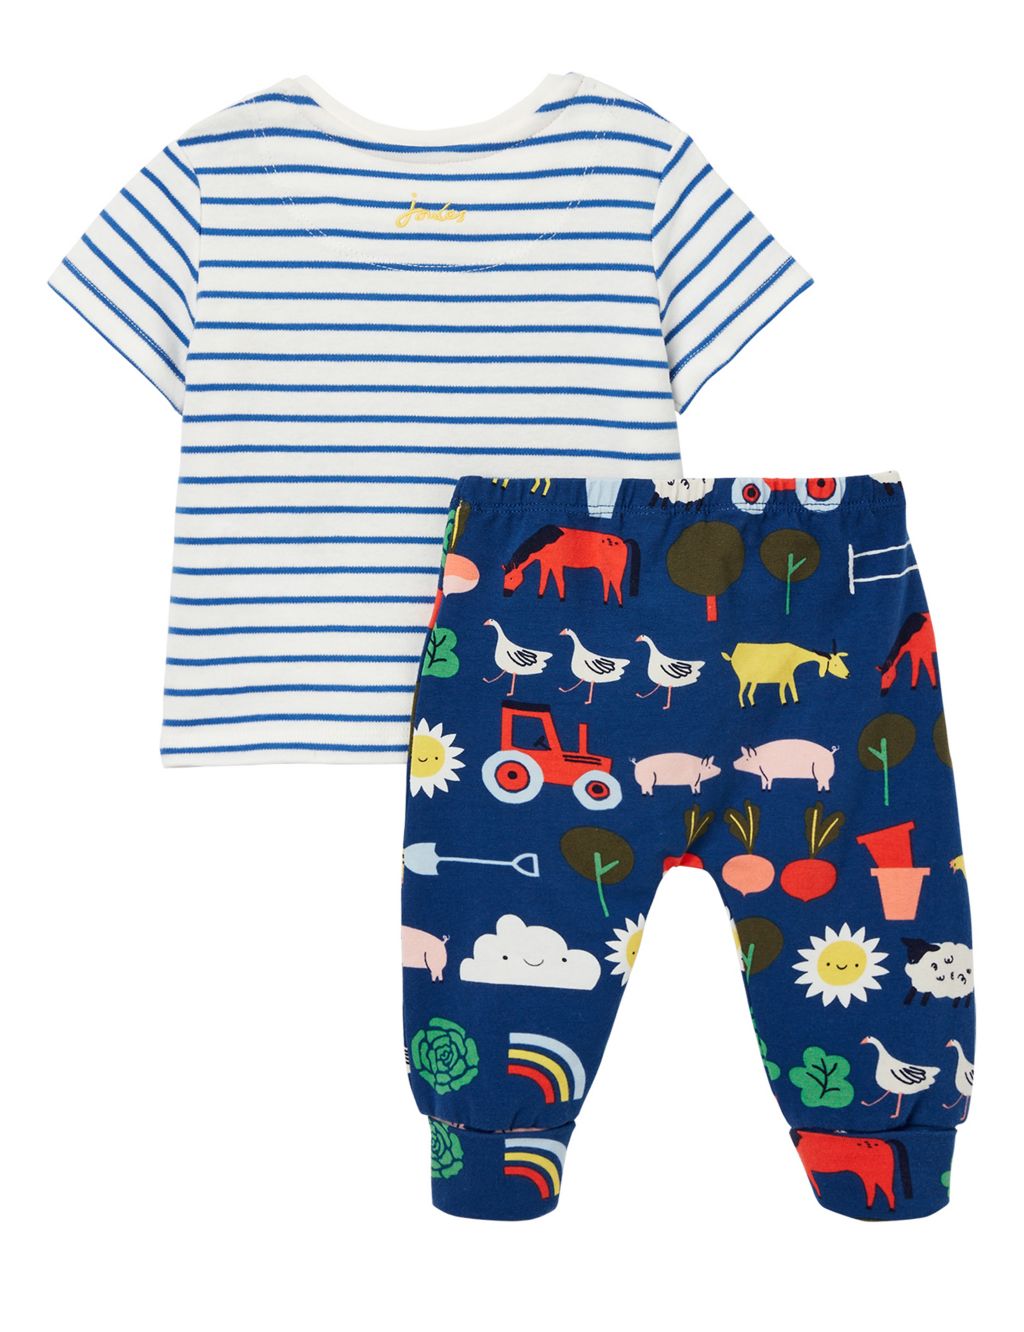 2pc Cotton Rich Farm Animal Outfit (0-3 Yrs) image 3